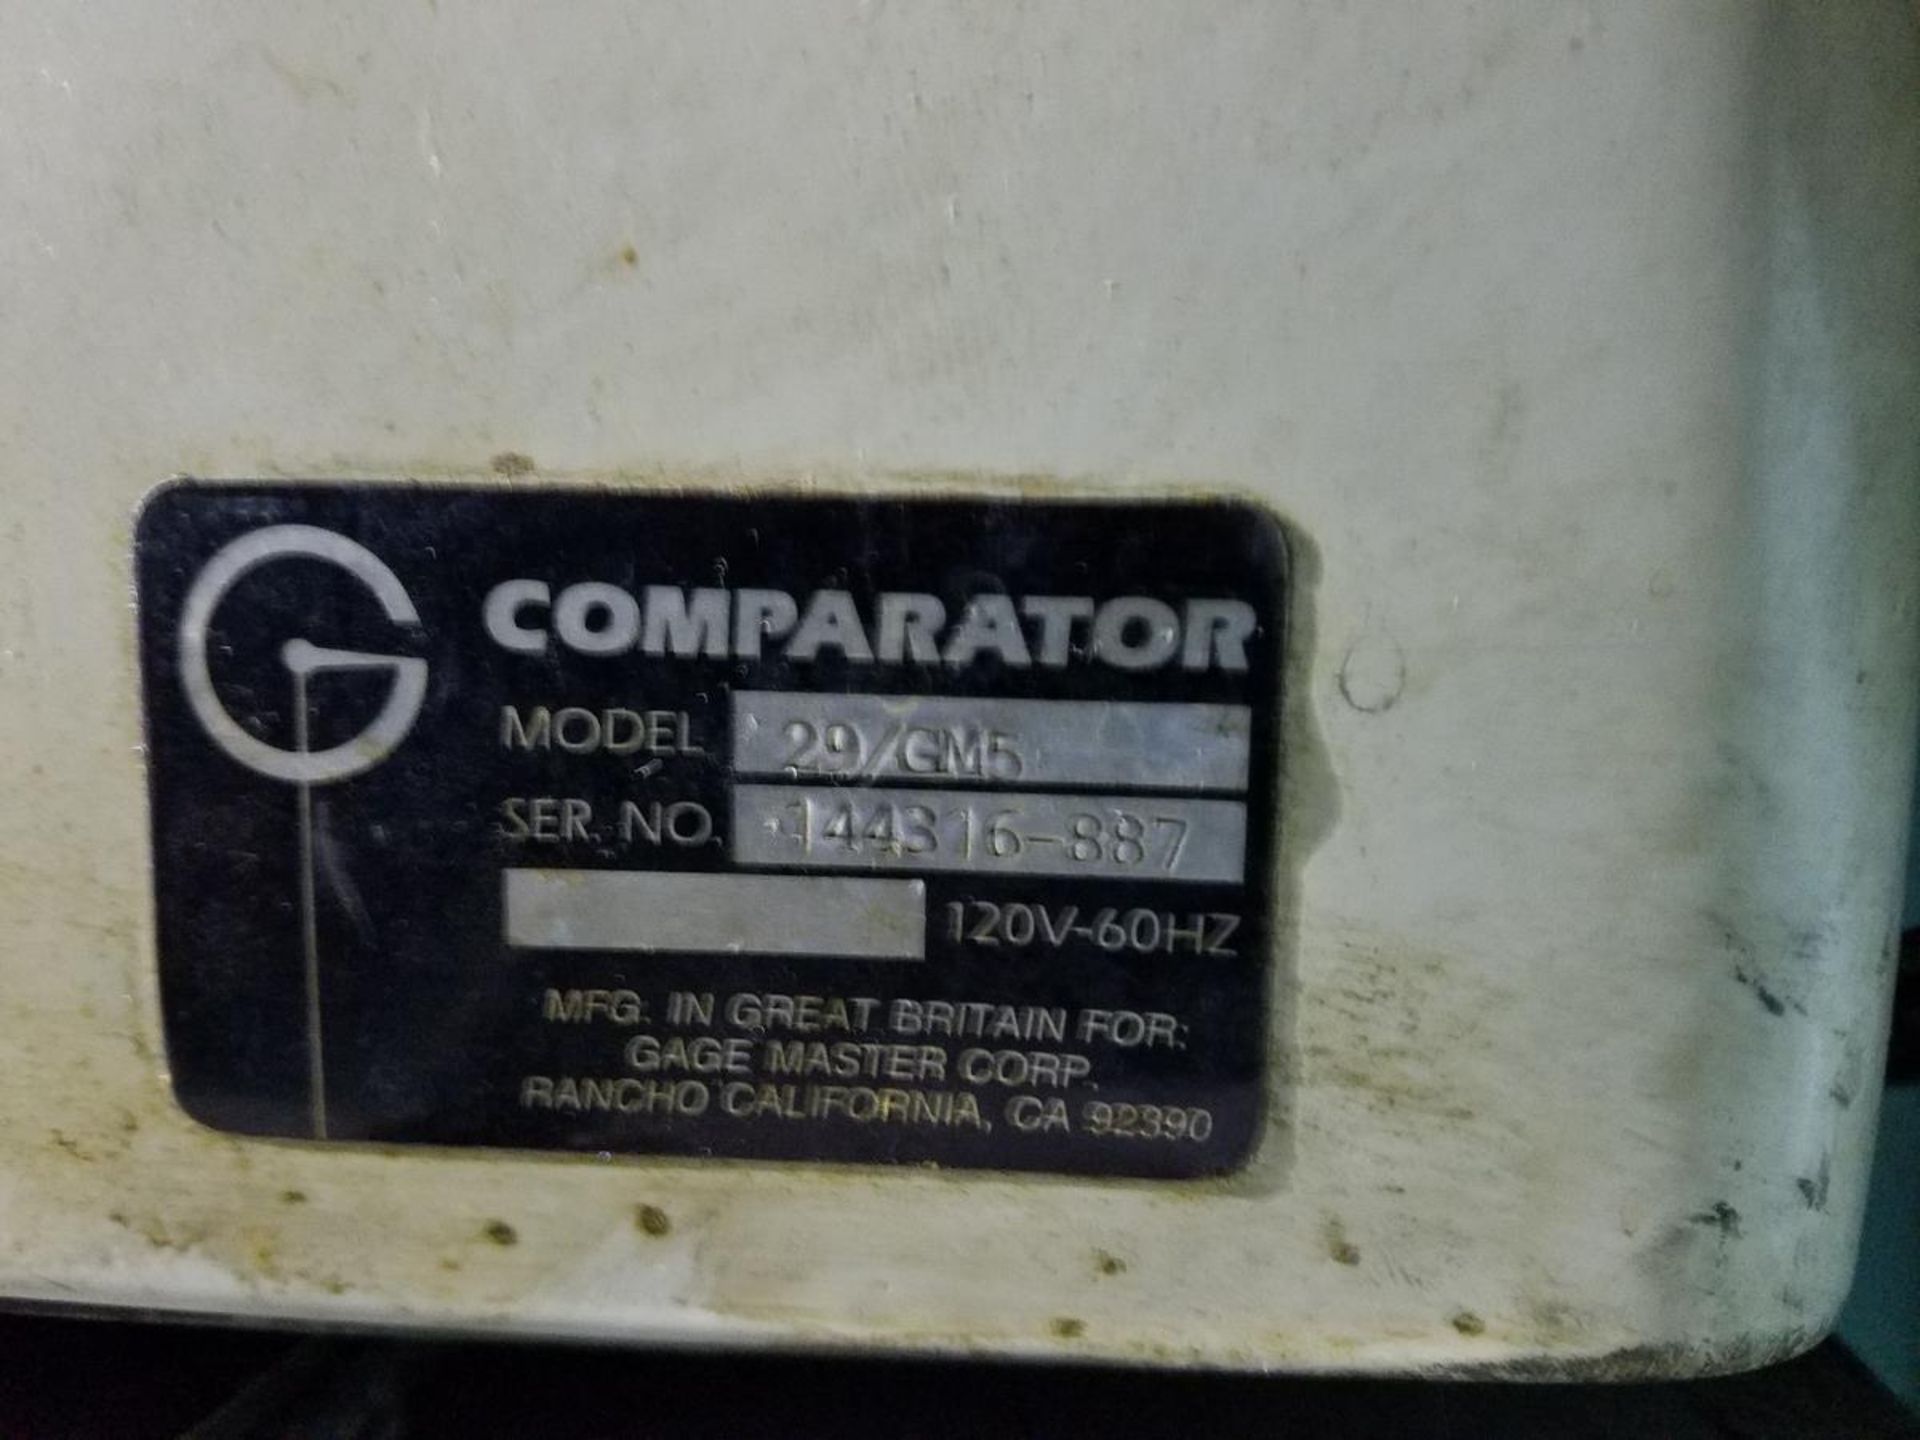 Gage Master Optical Comparator, M# 29/GM5, S/N 144316-887 | Rig Fee: $250 - Image 2 of 2